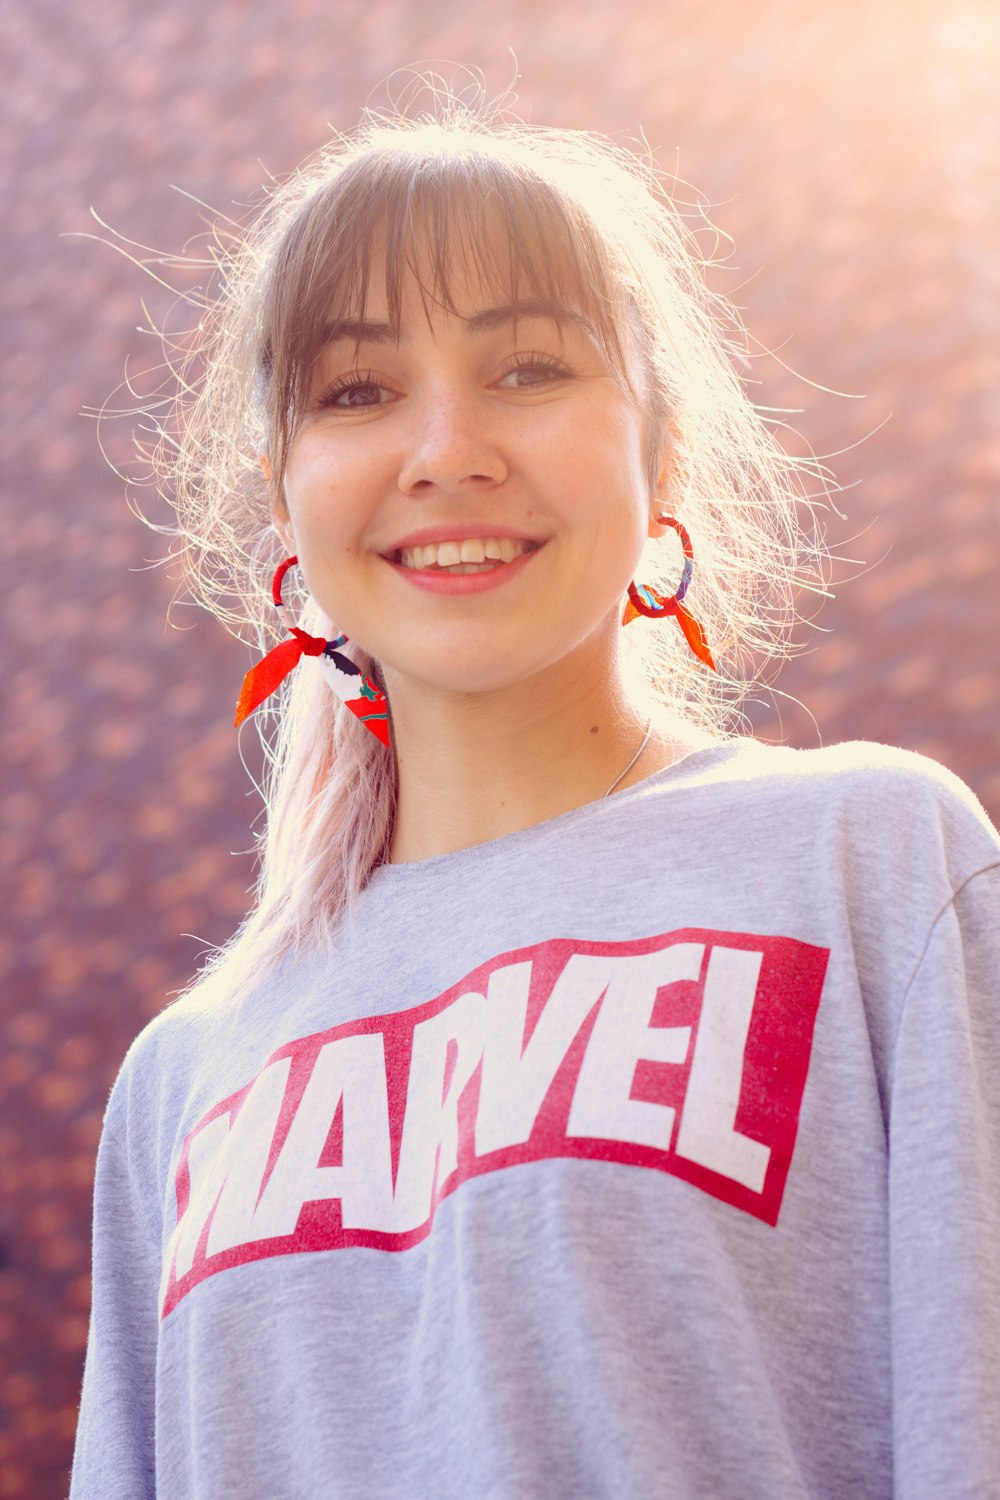 woman wearing gray and red Marvel shirt